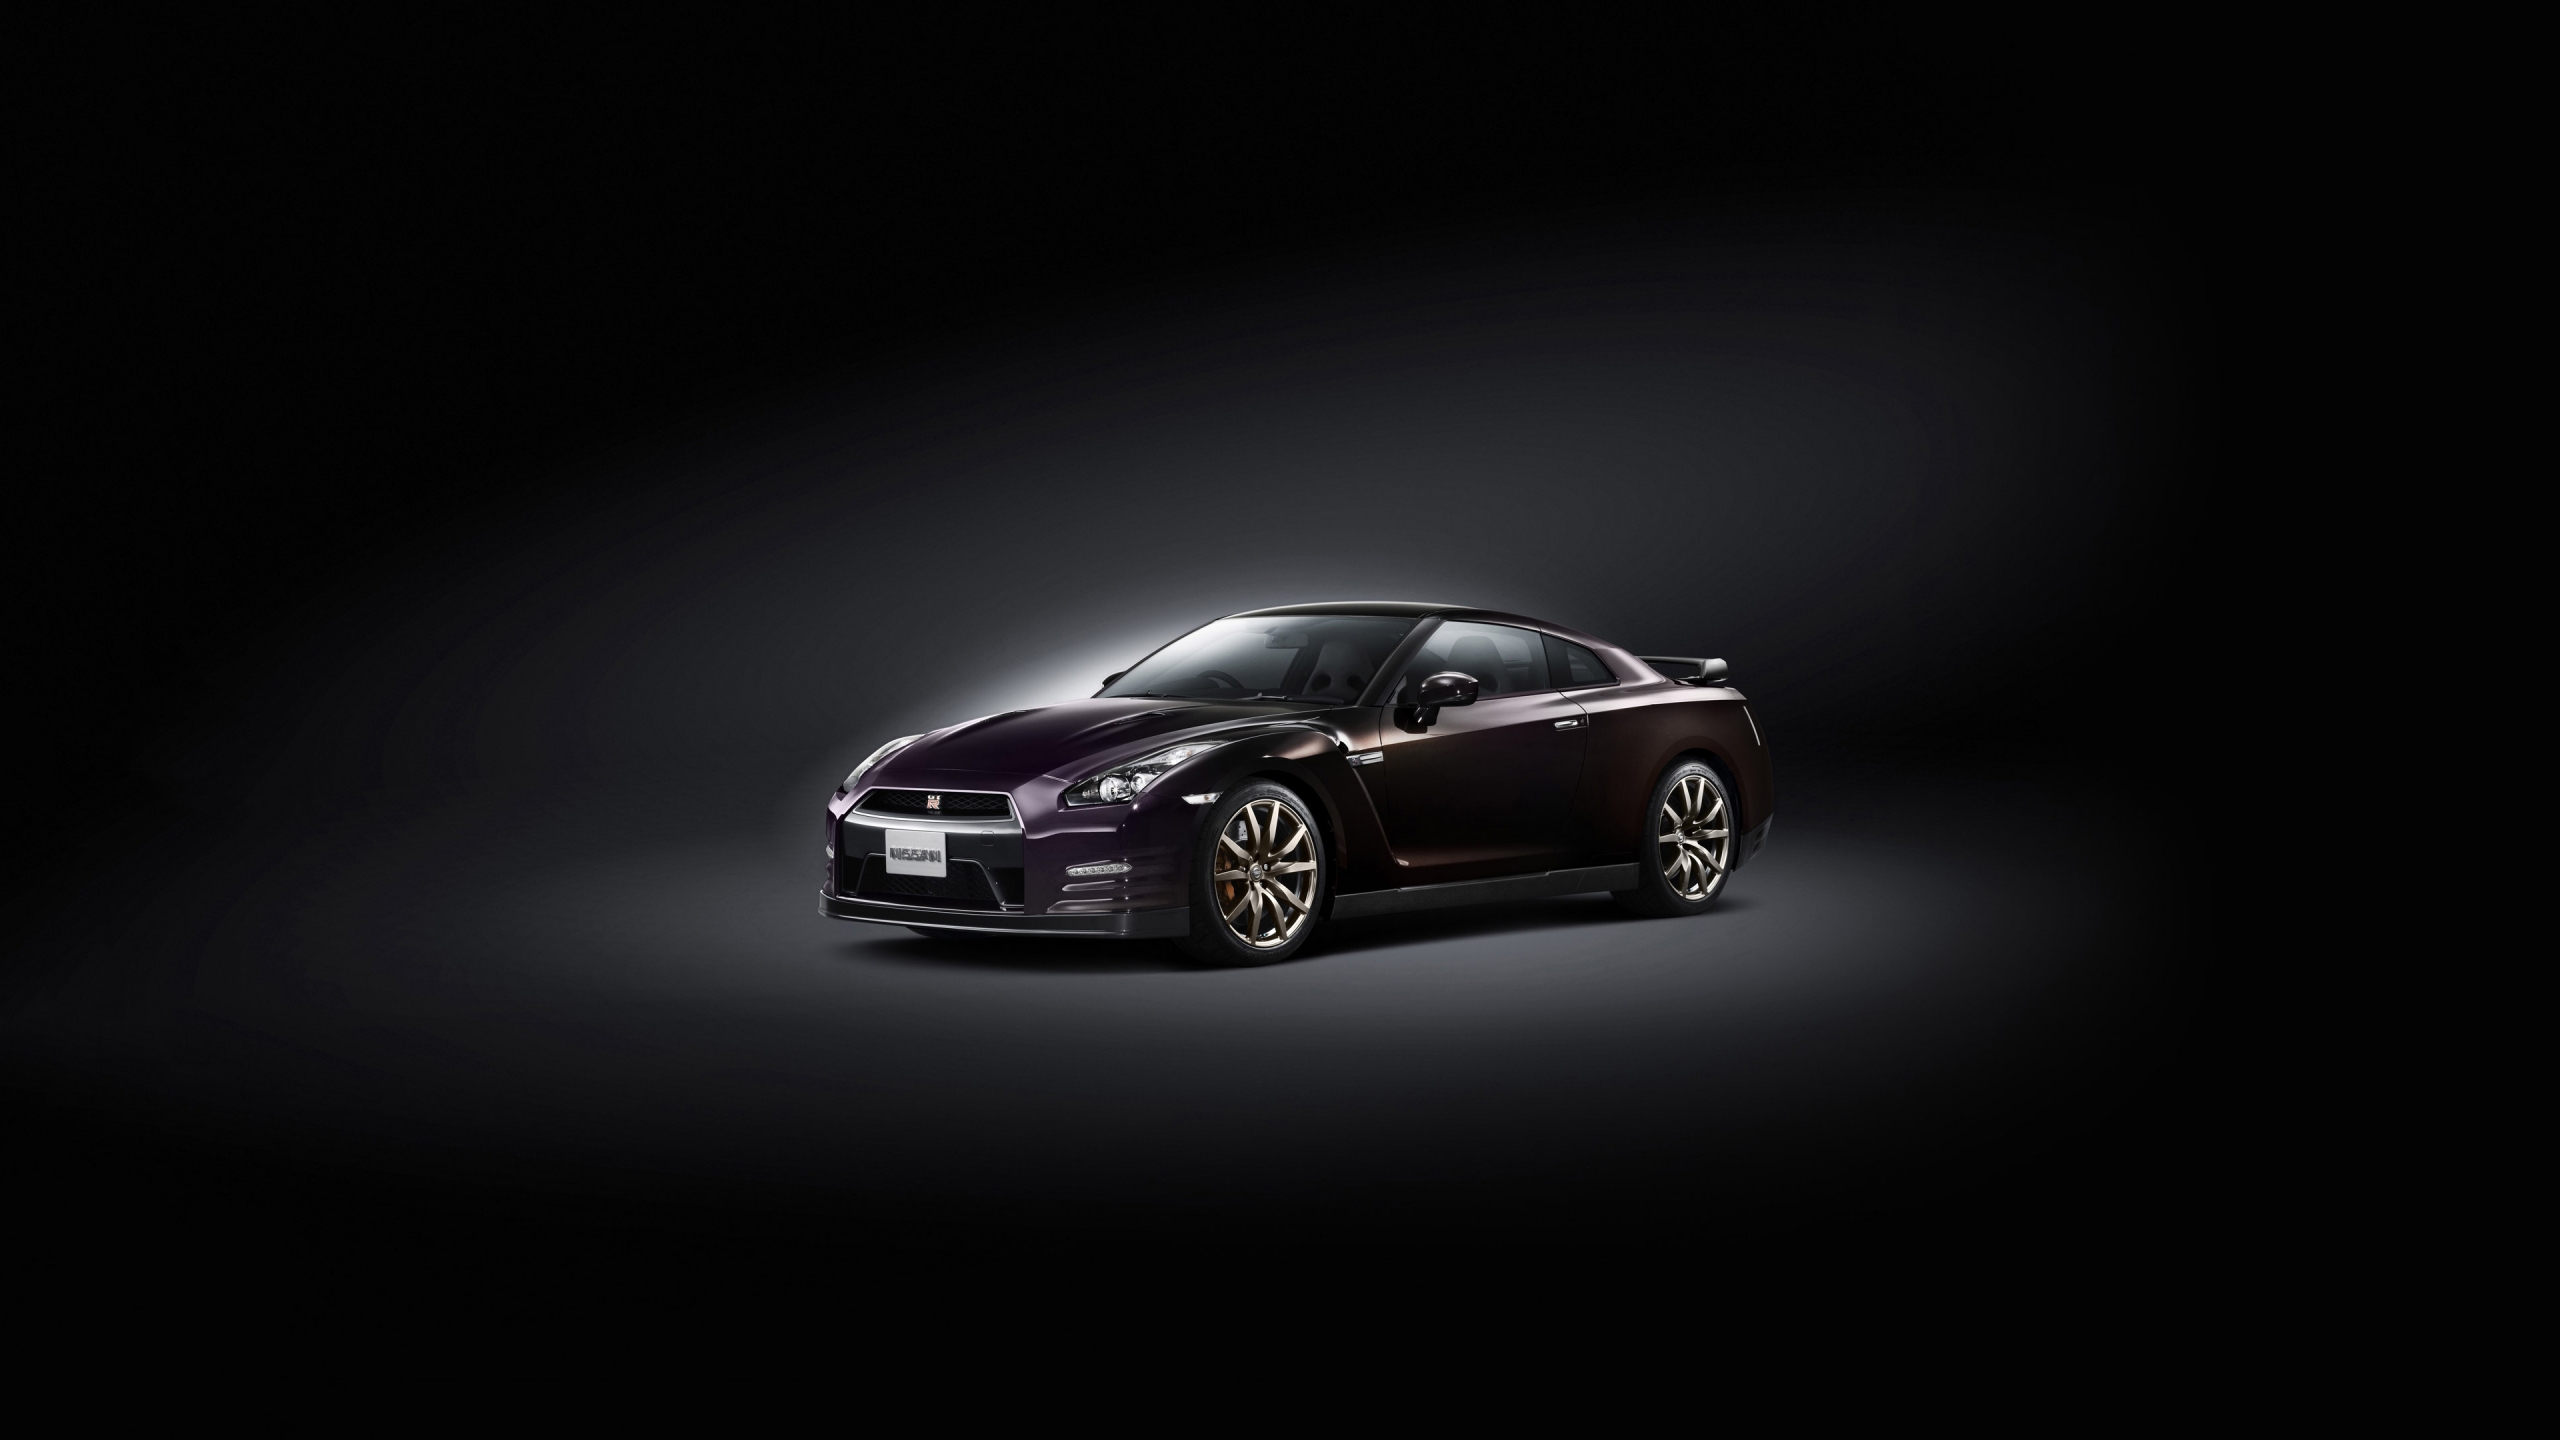 Nissan GT-R Special Edition 2014 for 2560x1440 HDTV resolution